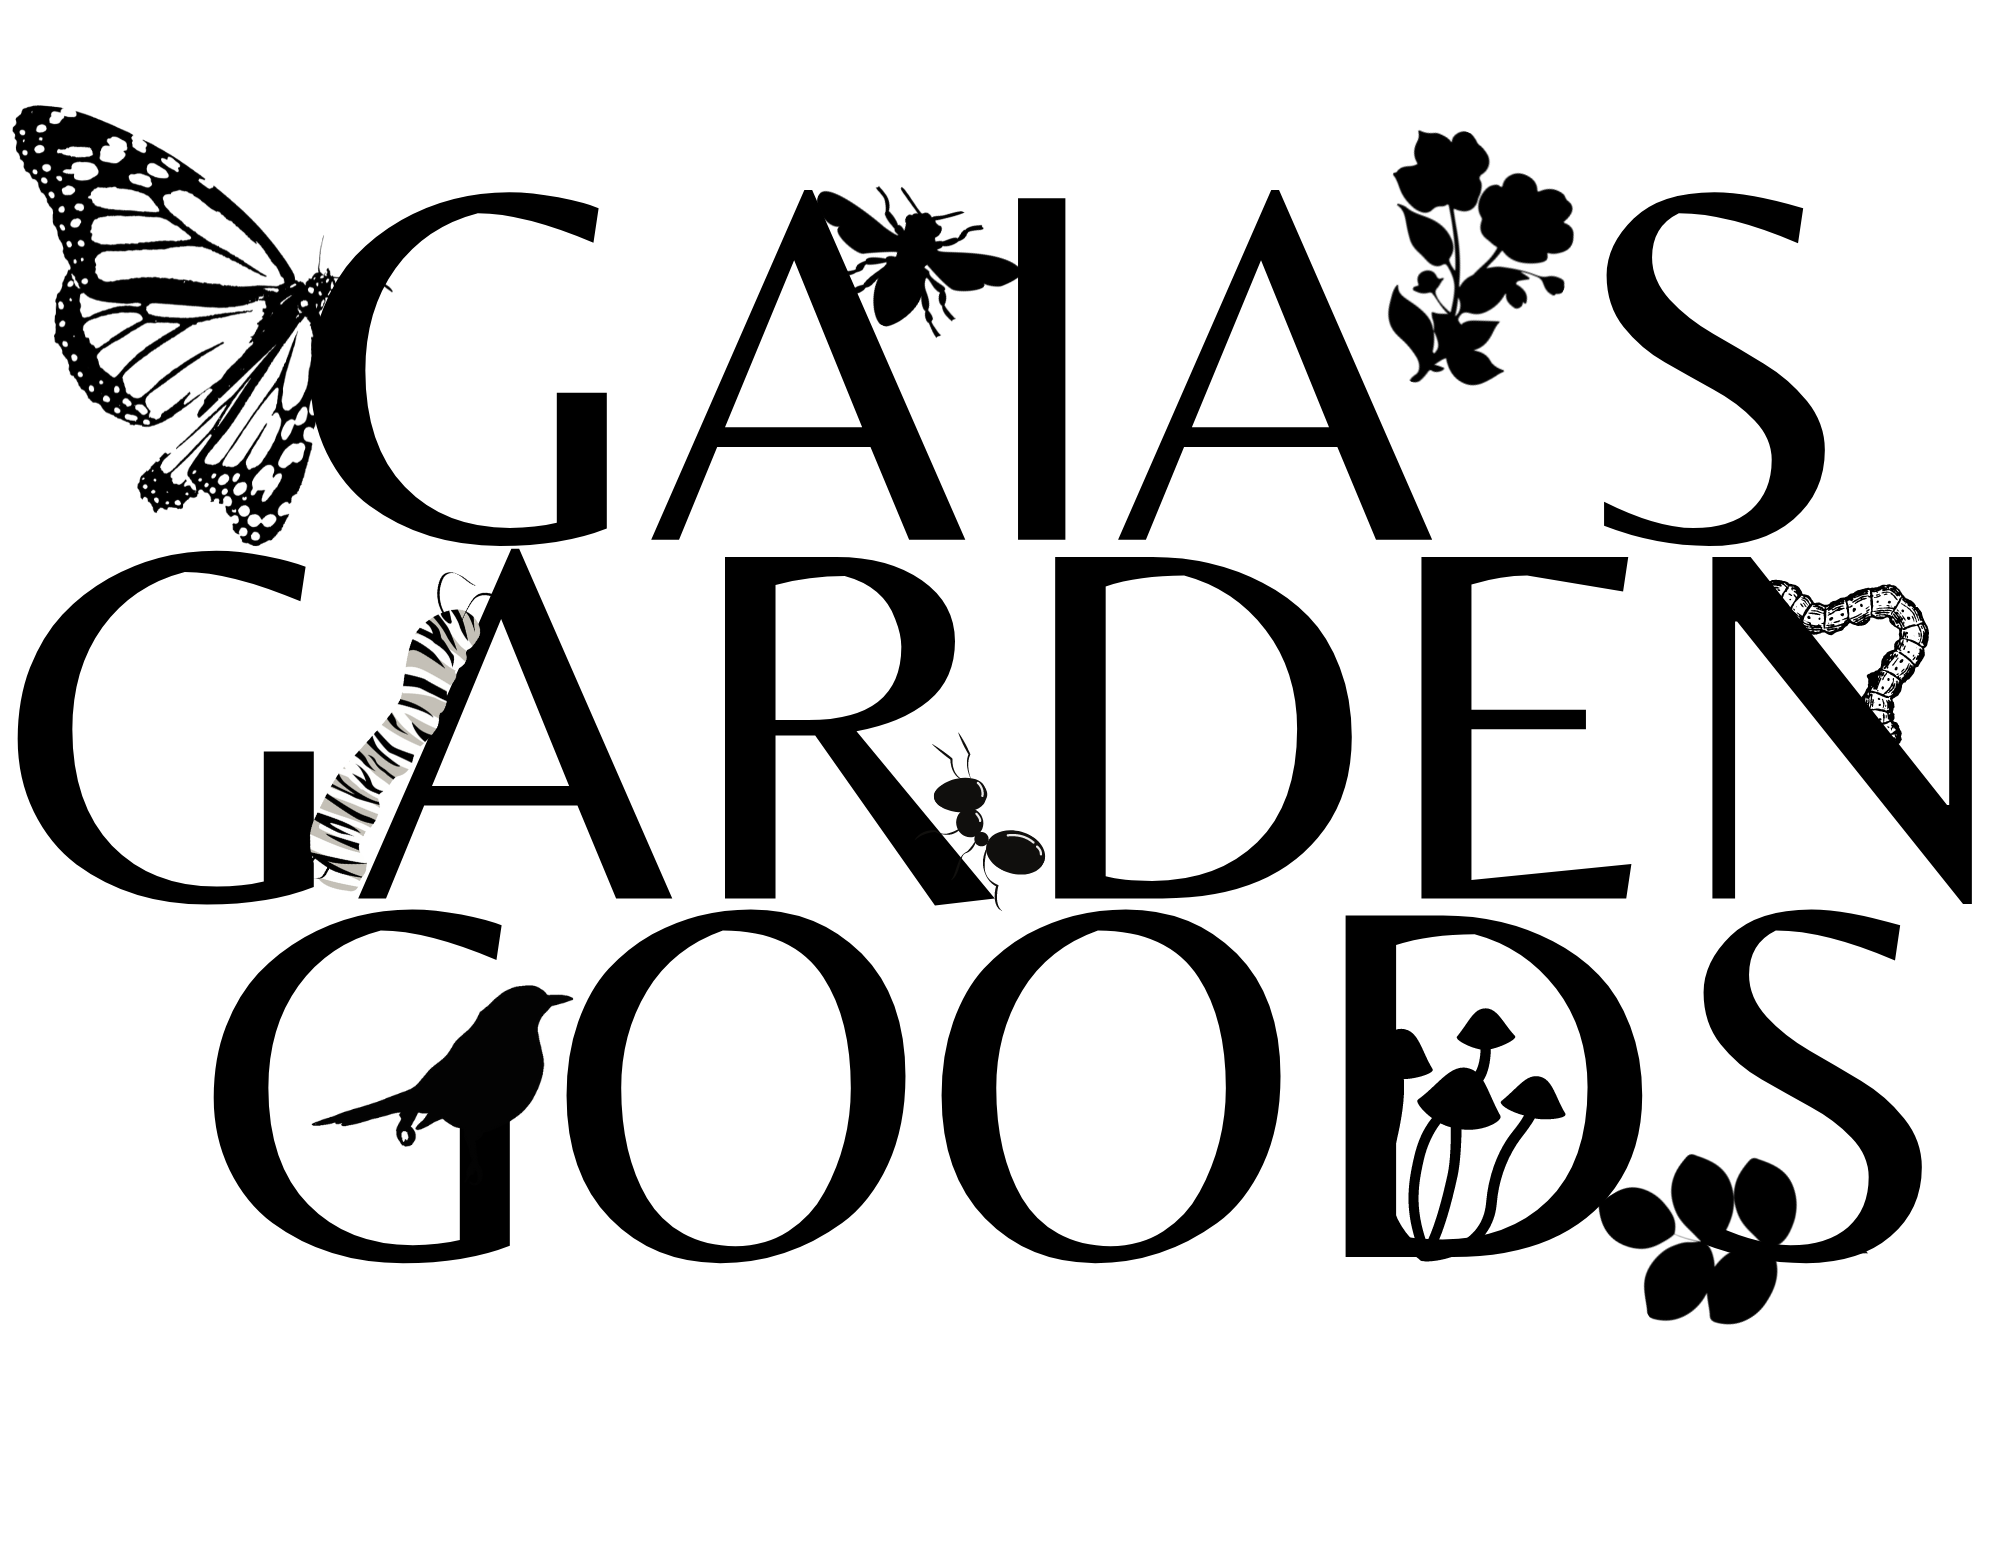 Gaia's Garden Goods (there is a butterfly, a caterpillar, a bird, mushrooms, a leaf, a worm, an ant, a fly and some flowers among the letters) 